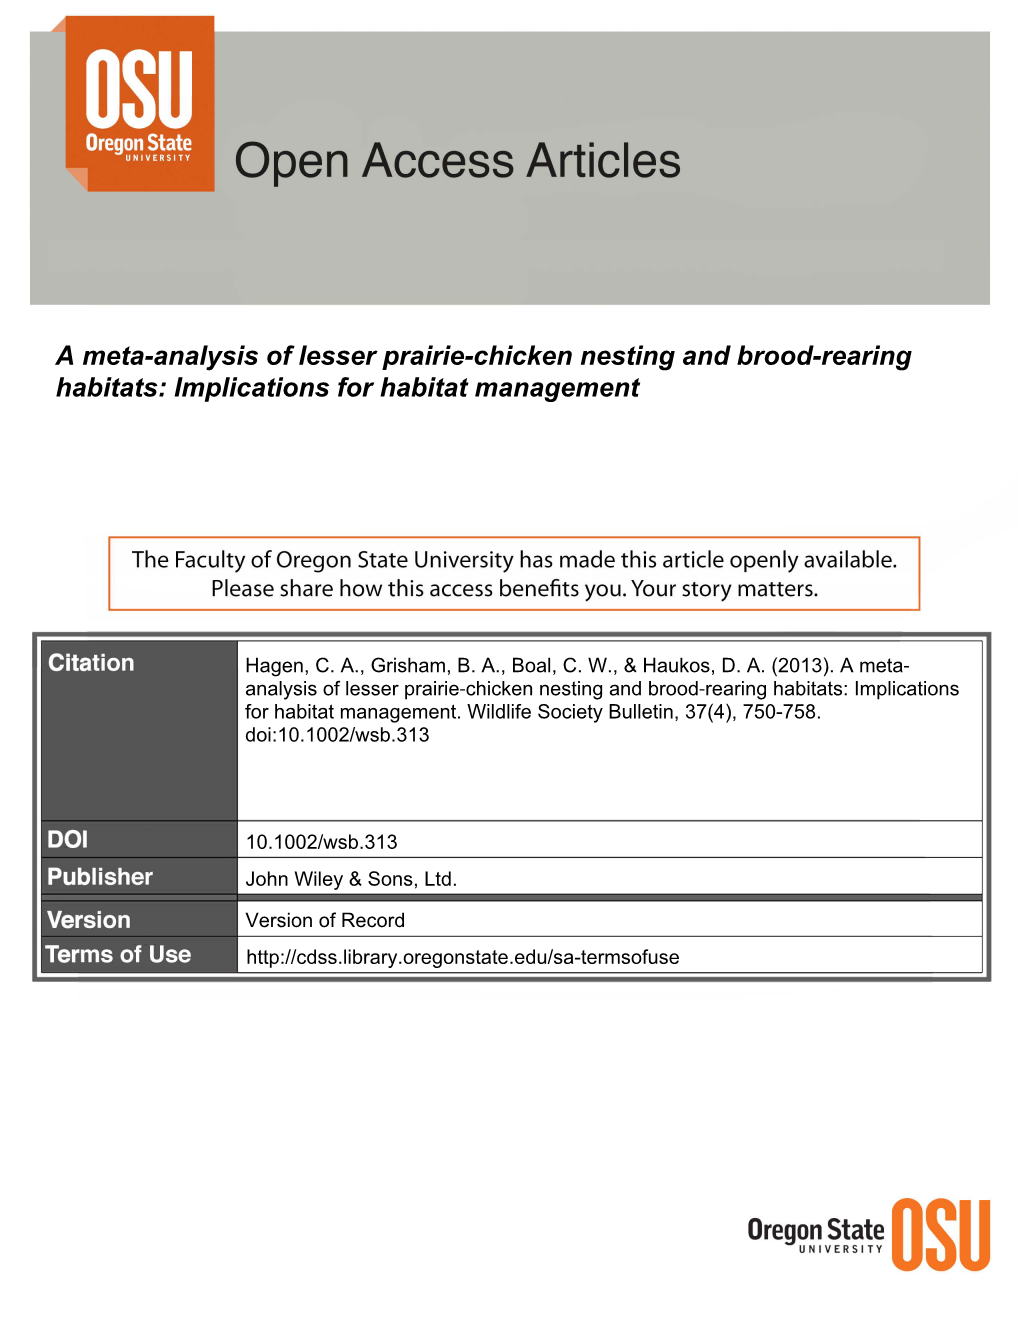 A Meta-Analysis of Lesser Prairie-Chicken Nesting and Brood-Rearing Habitats: Implications for Habitat Management